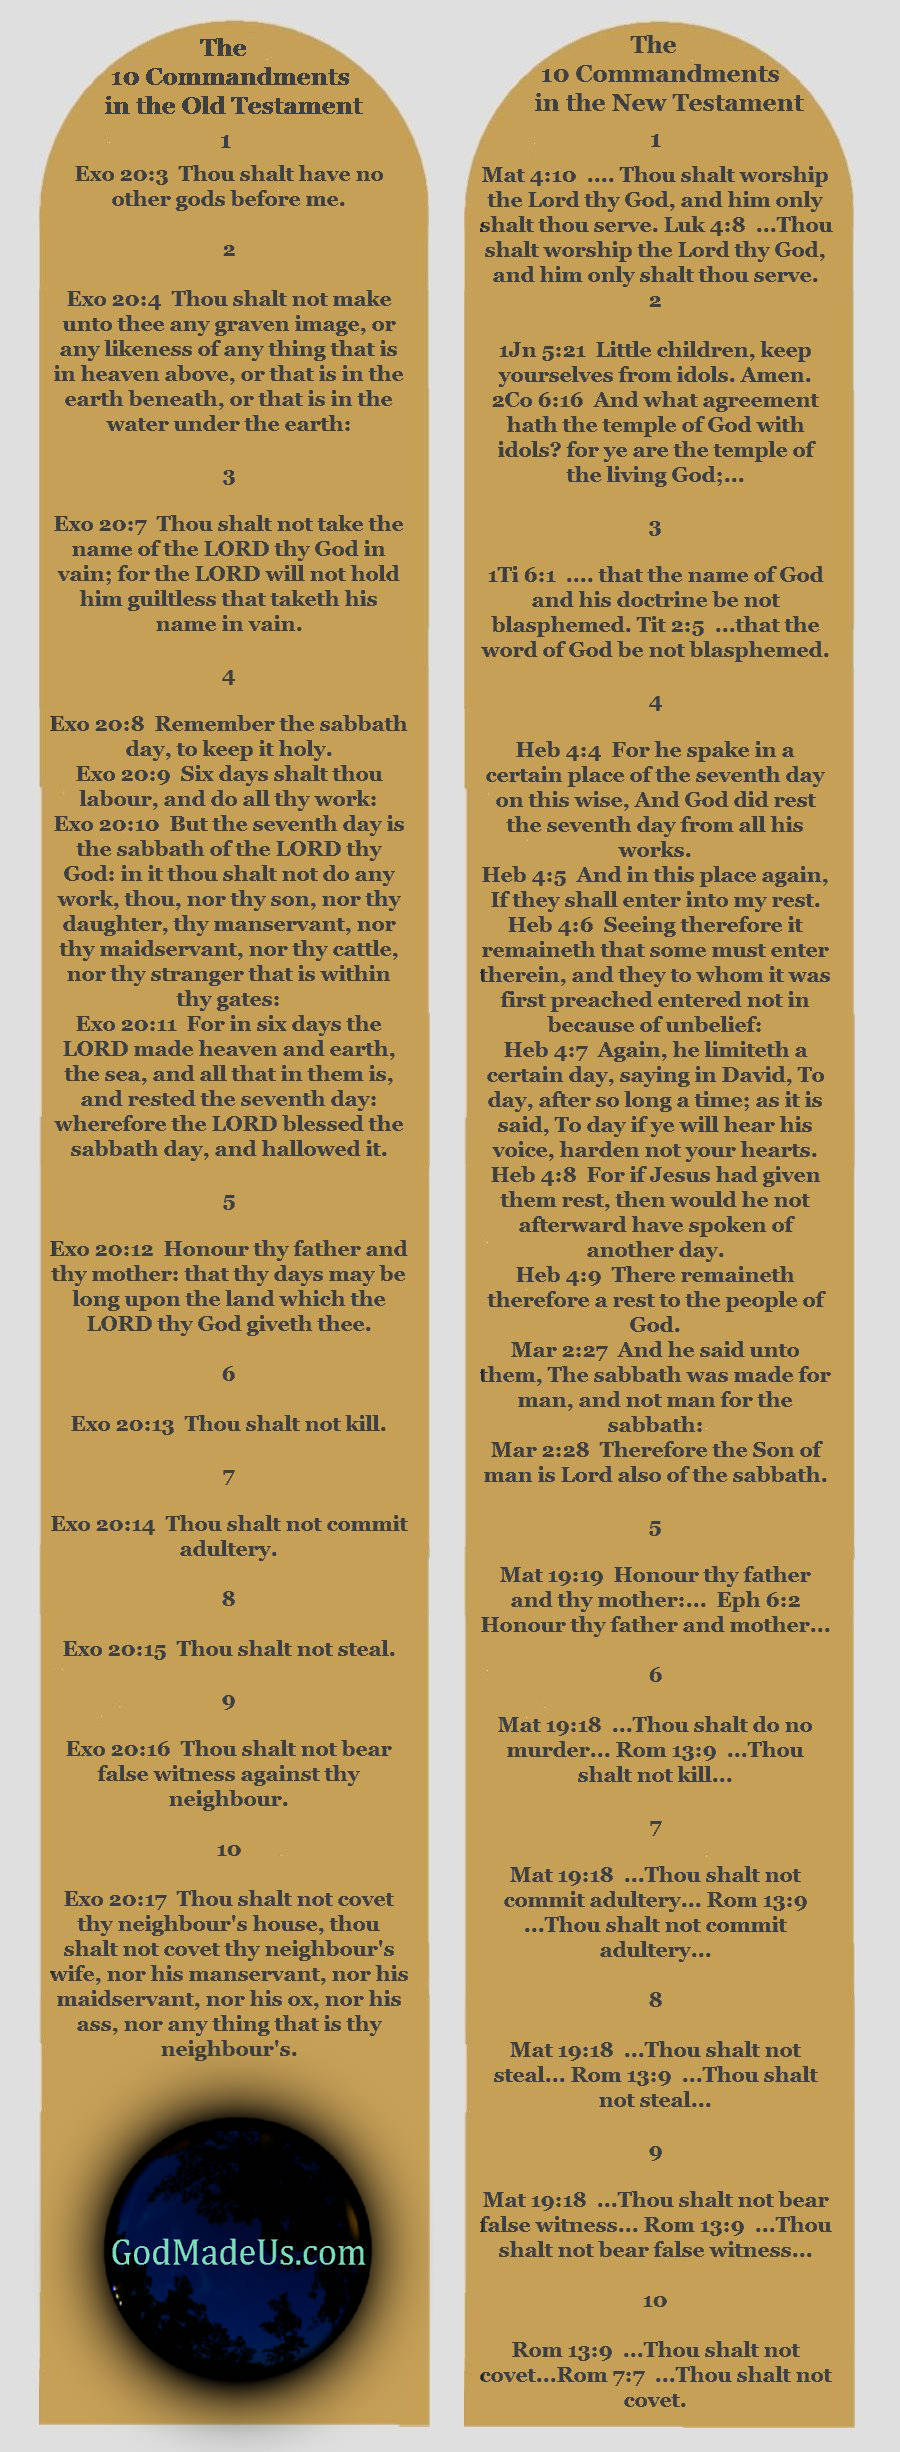 Image showing the verses which depict the 10 commandments in both the old and new testaments.